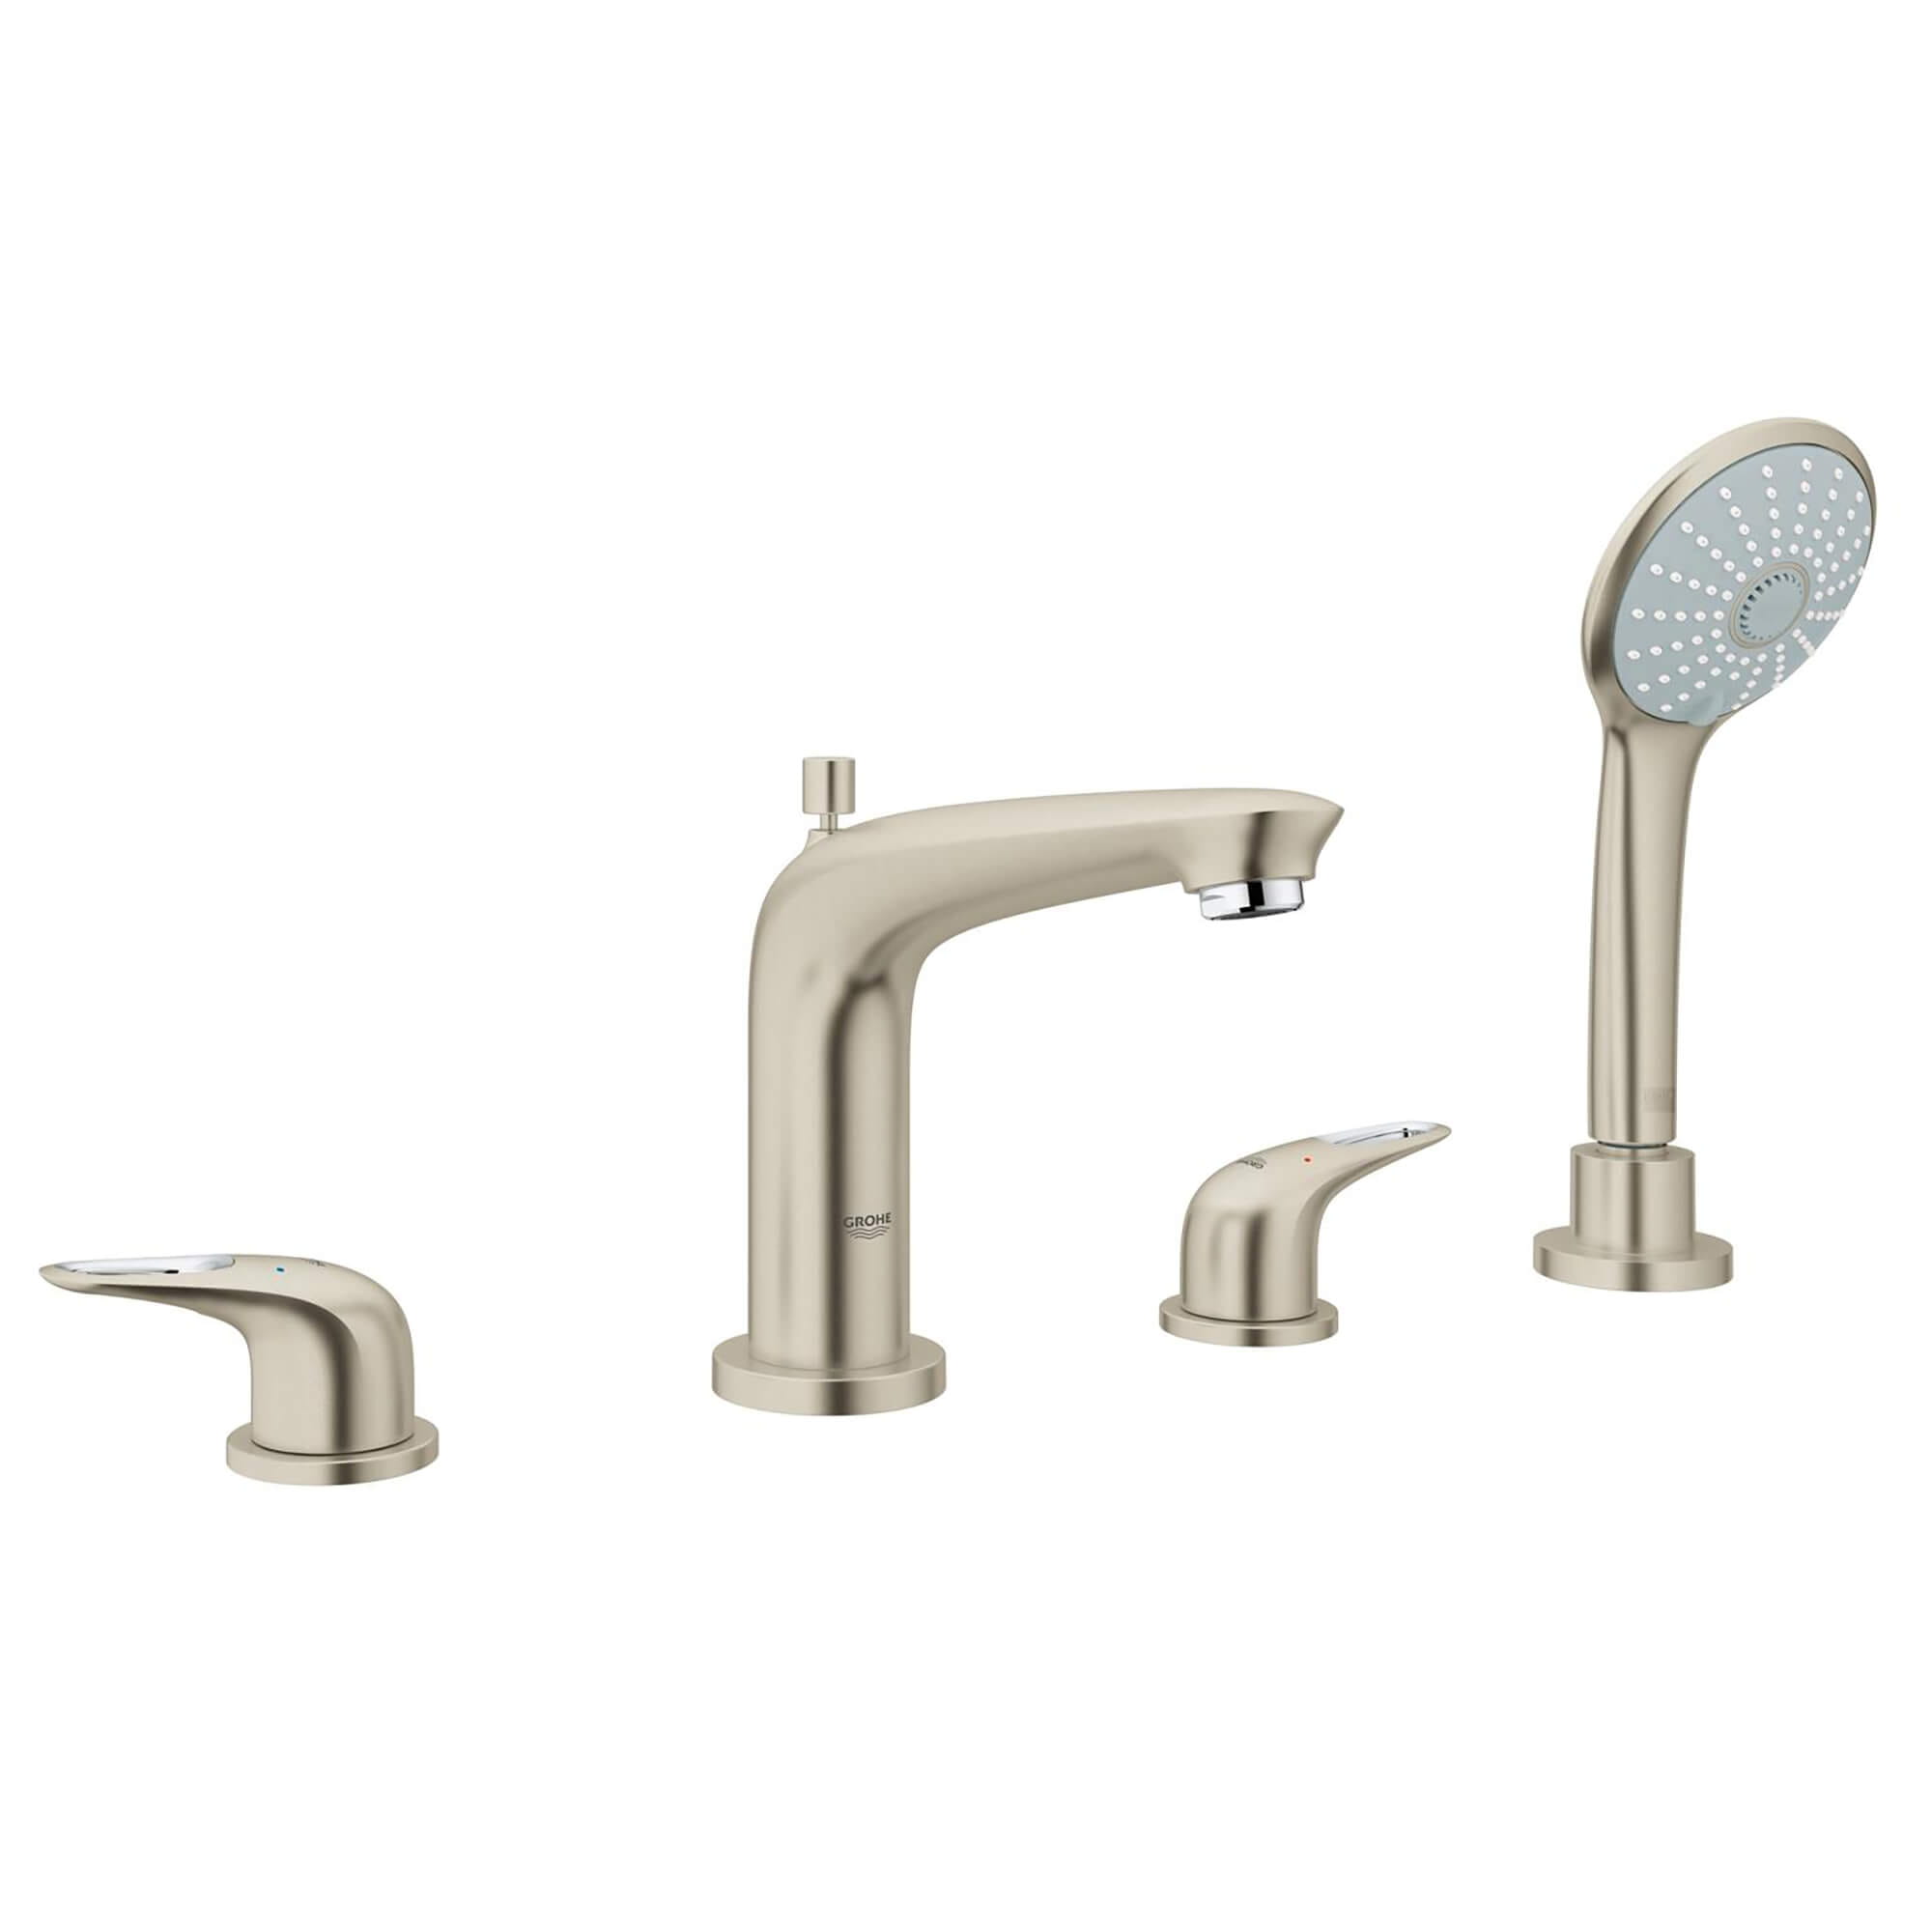 Eurostyle Roman Tub Filler With 2.5 GPM Personal Hand Shower